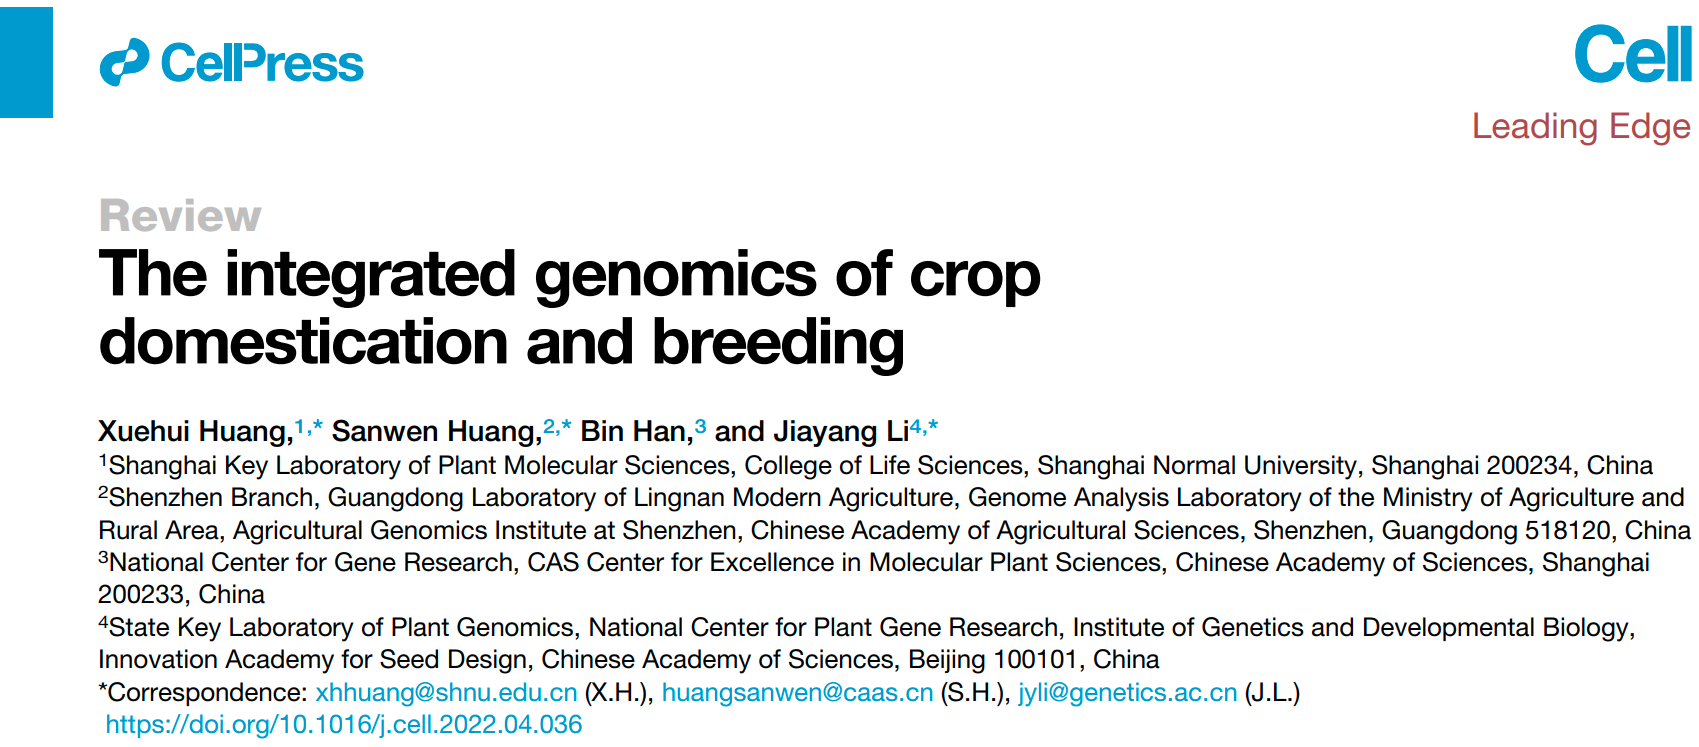 The integrated genomics of crop domestication and breeding